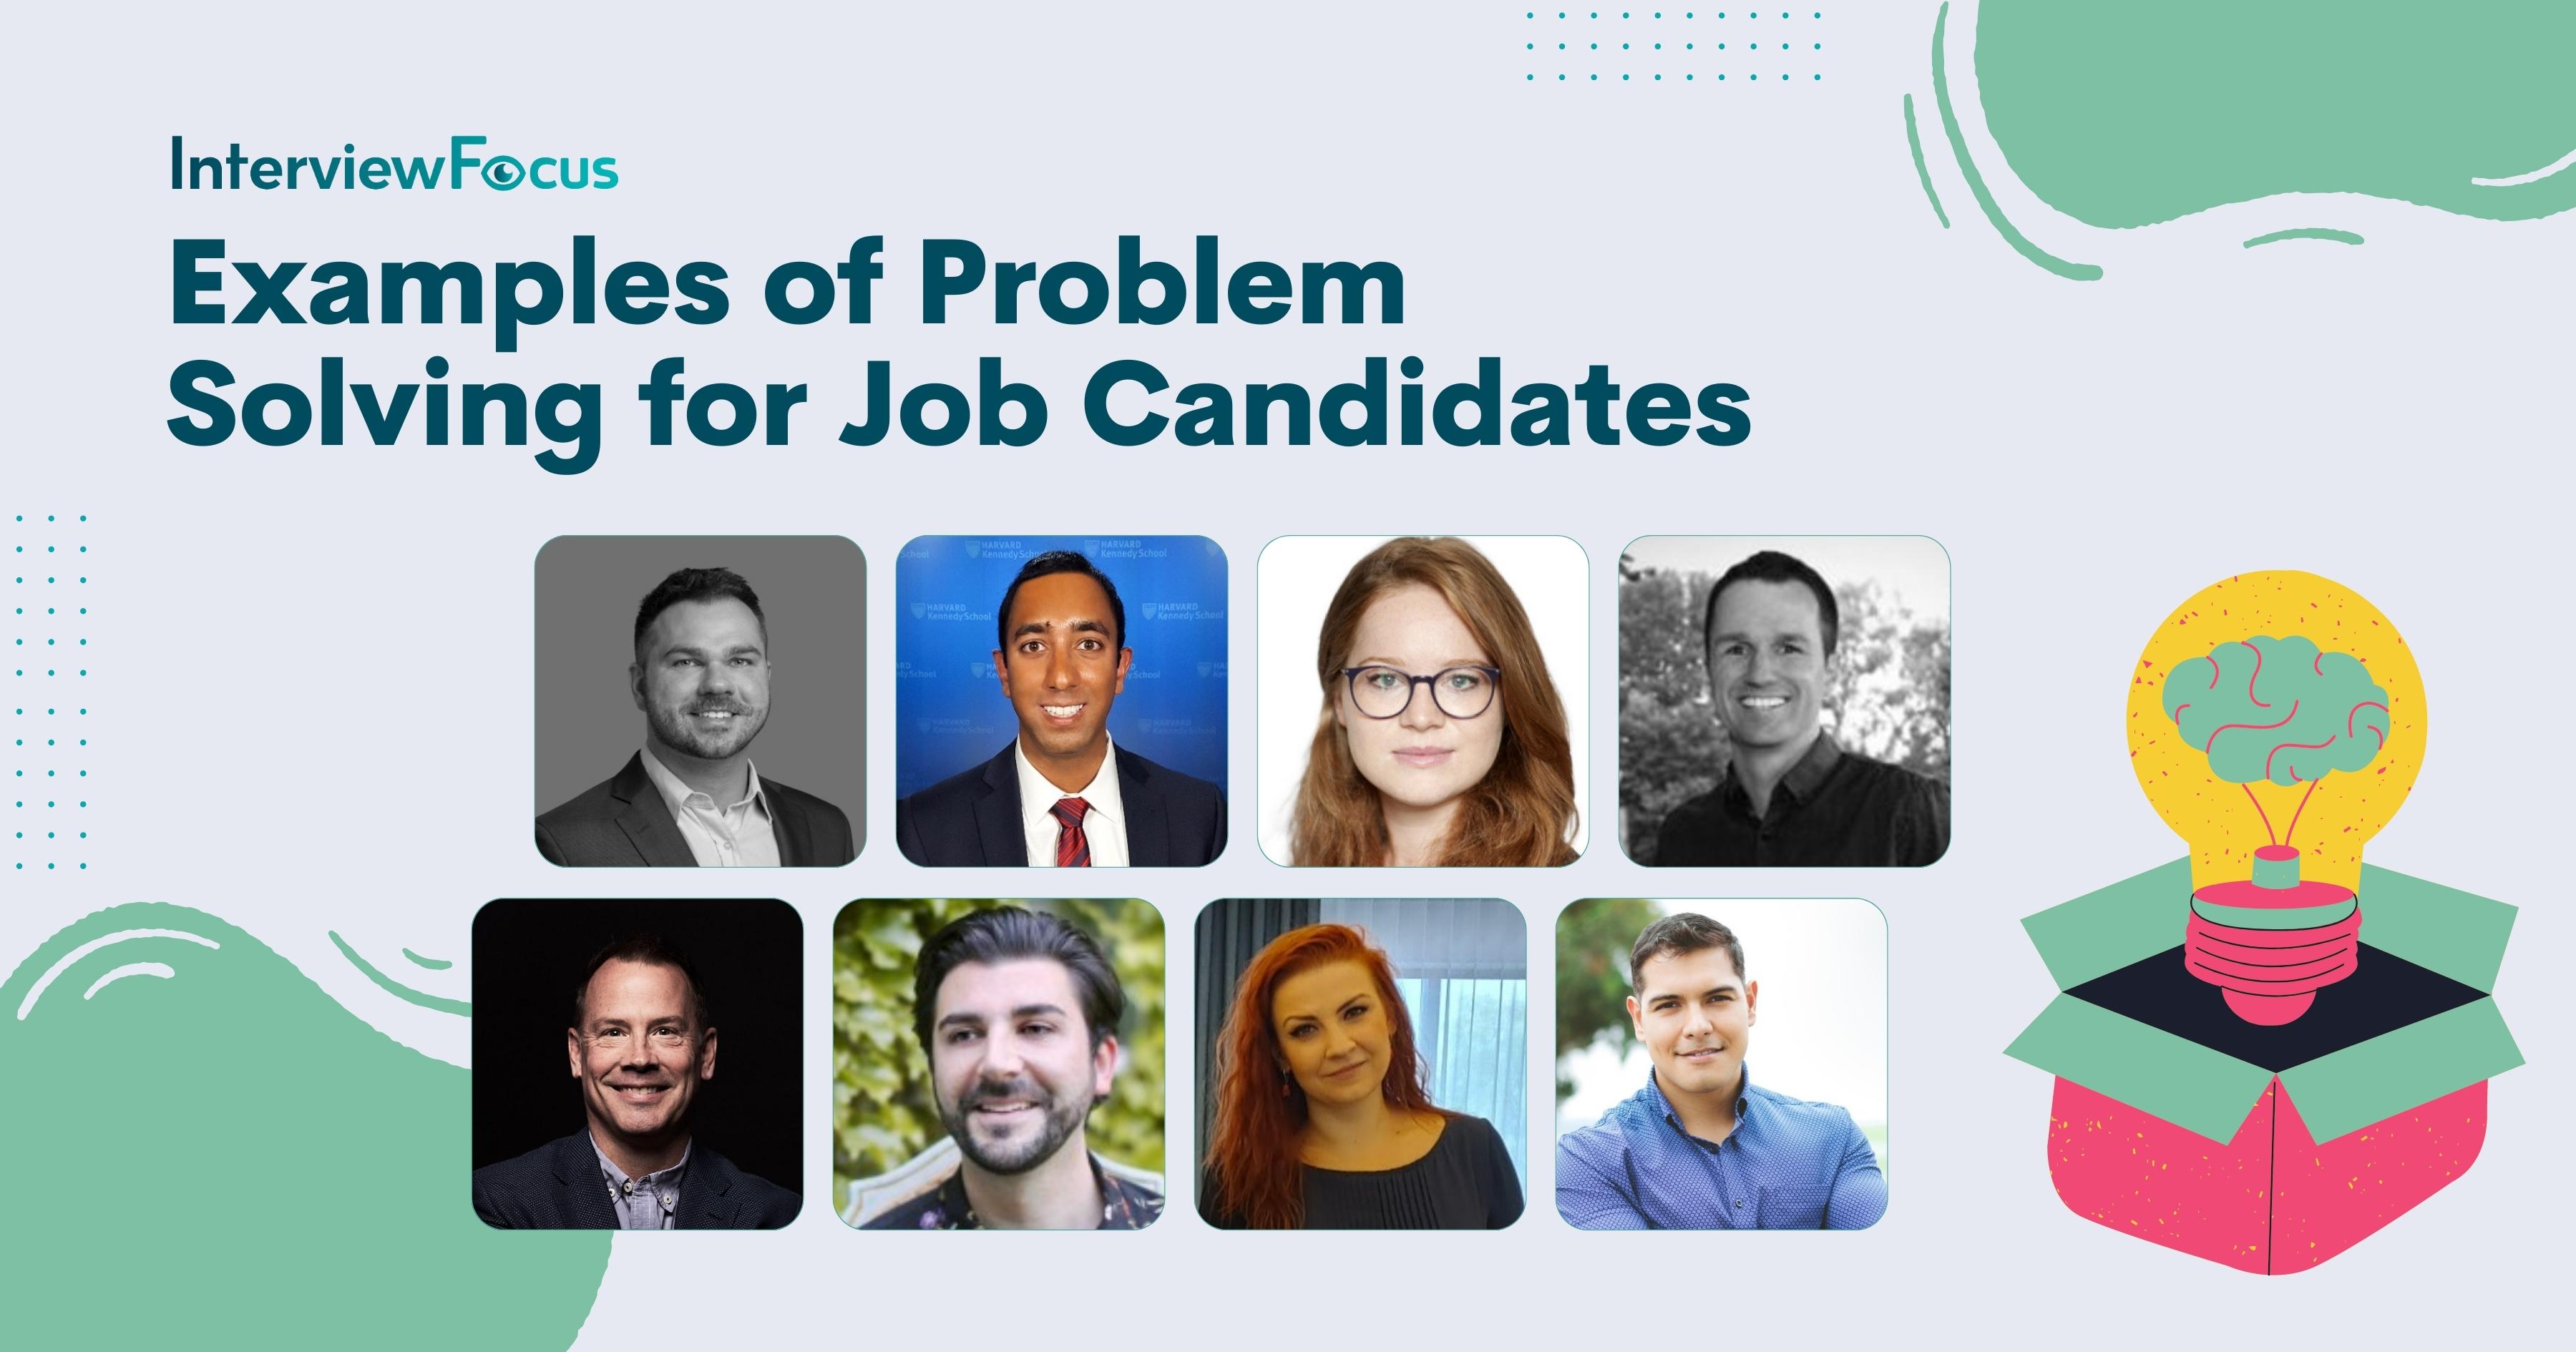 10 Examples of Problem Solving for Job Candidates